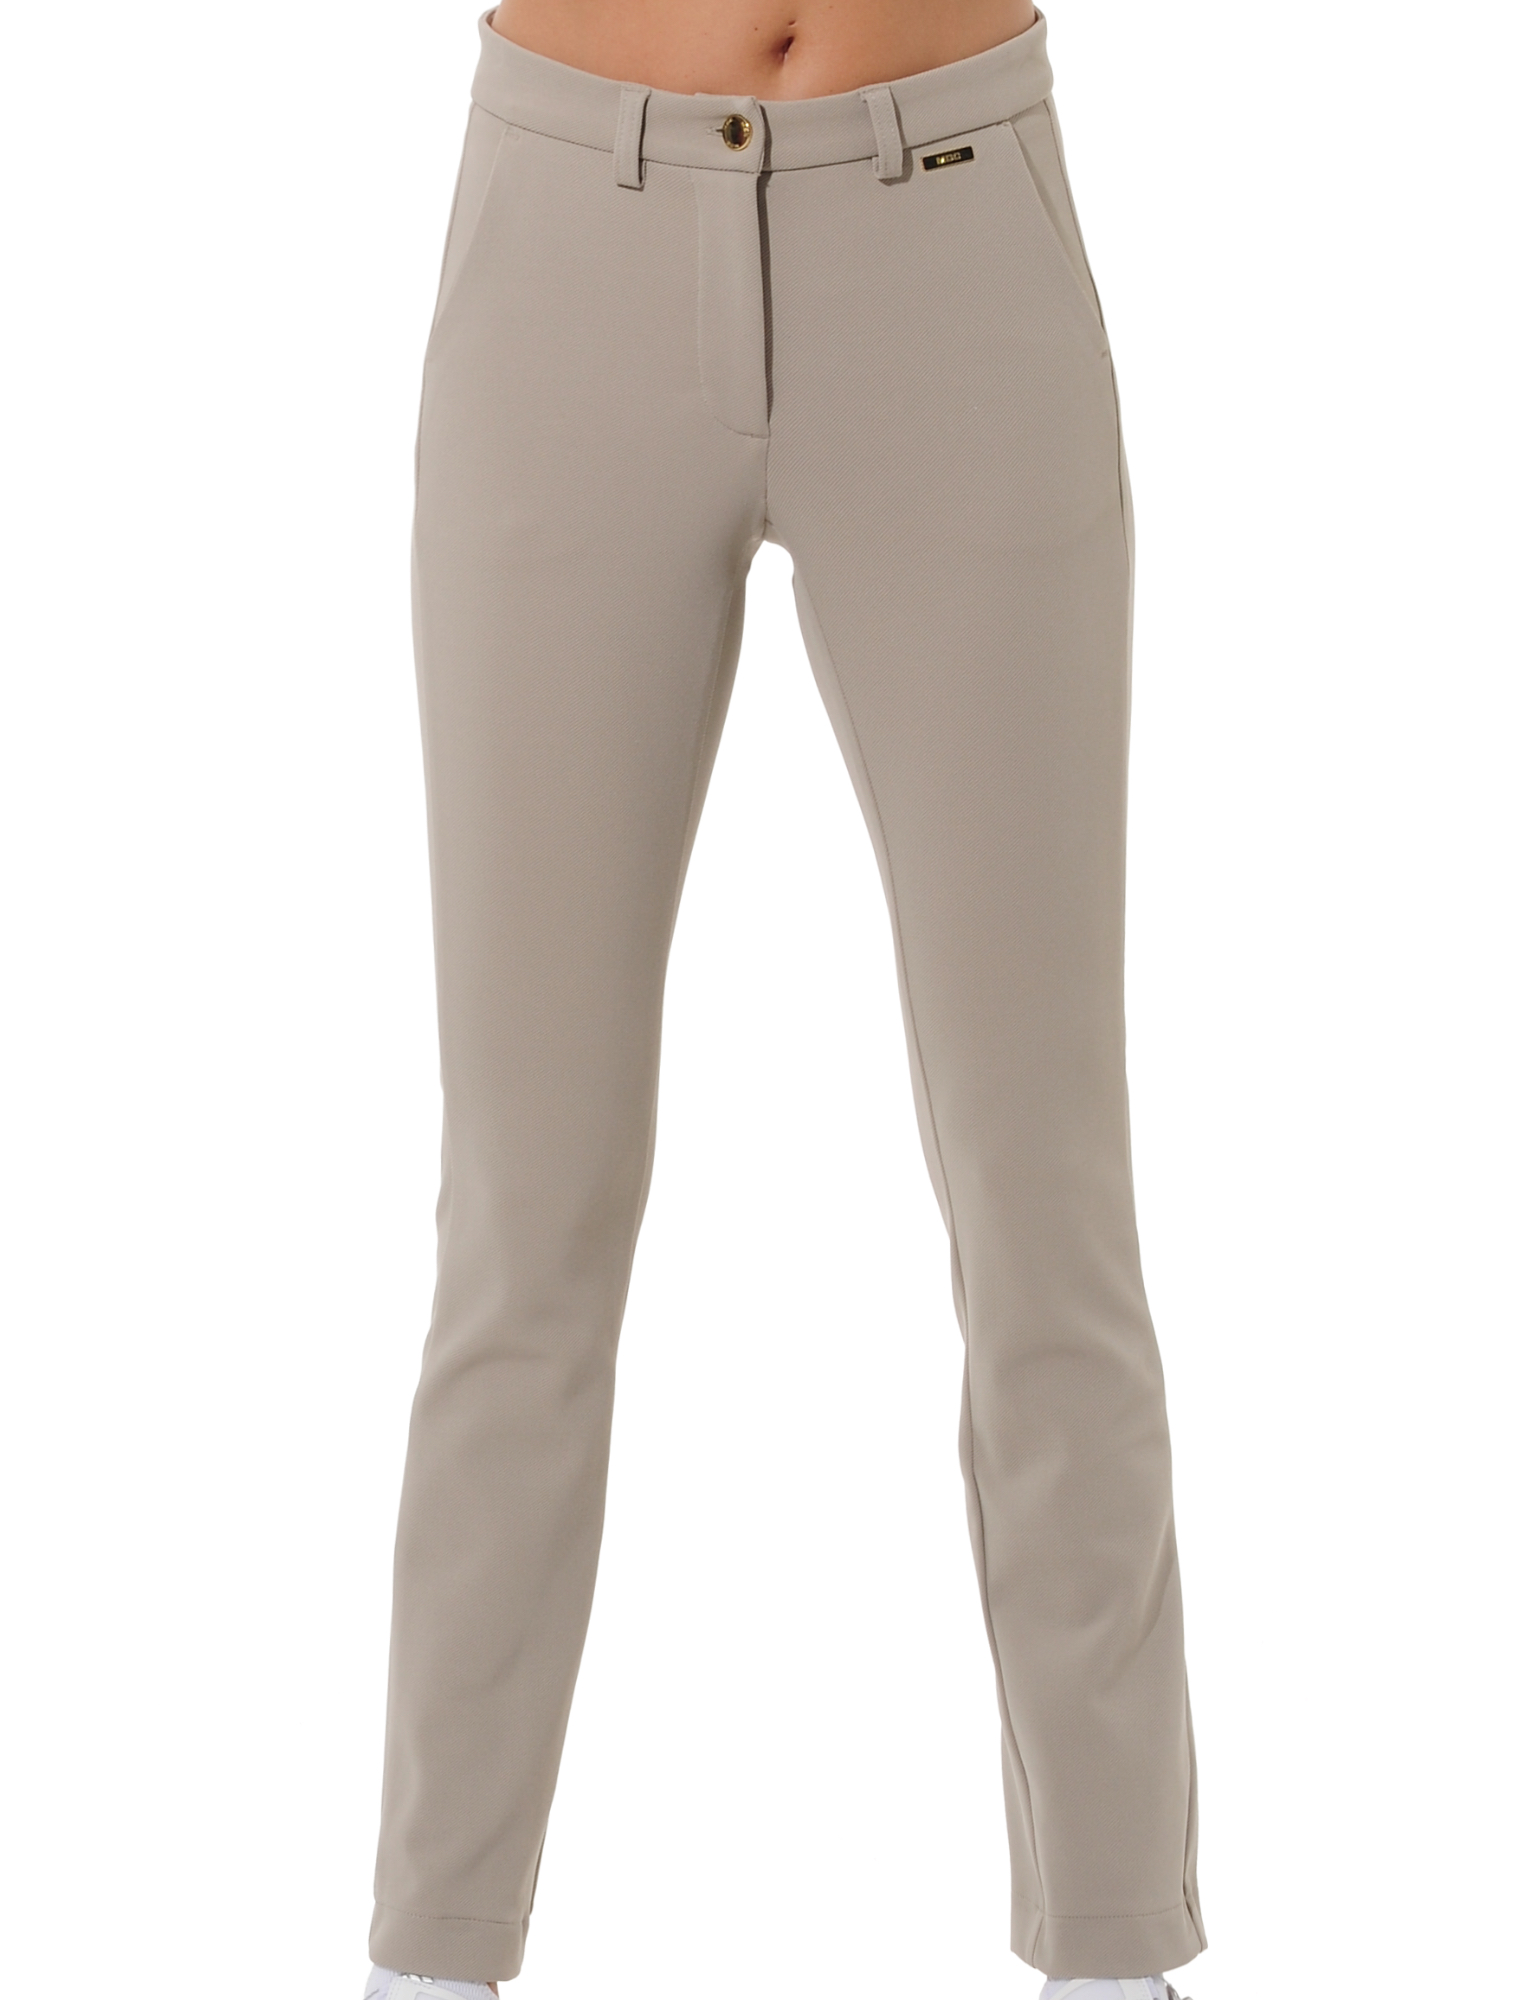 Cord stretch long chinos light taupe